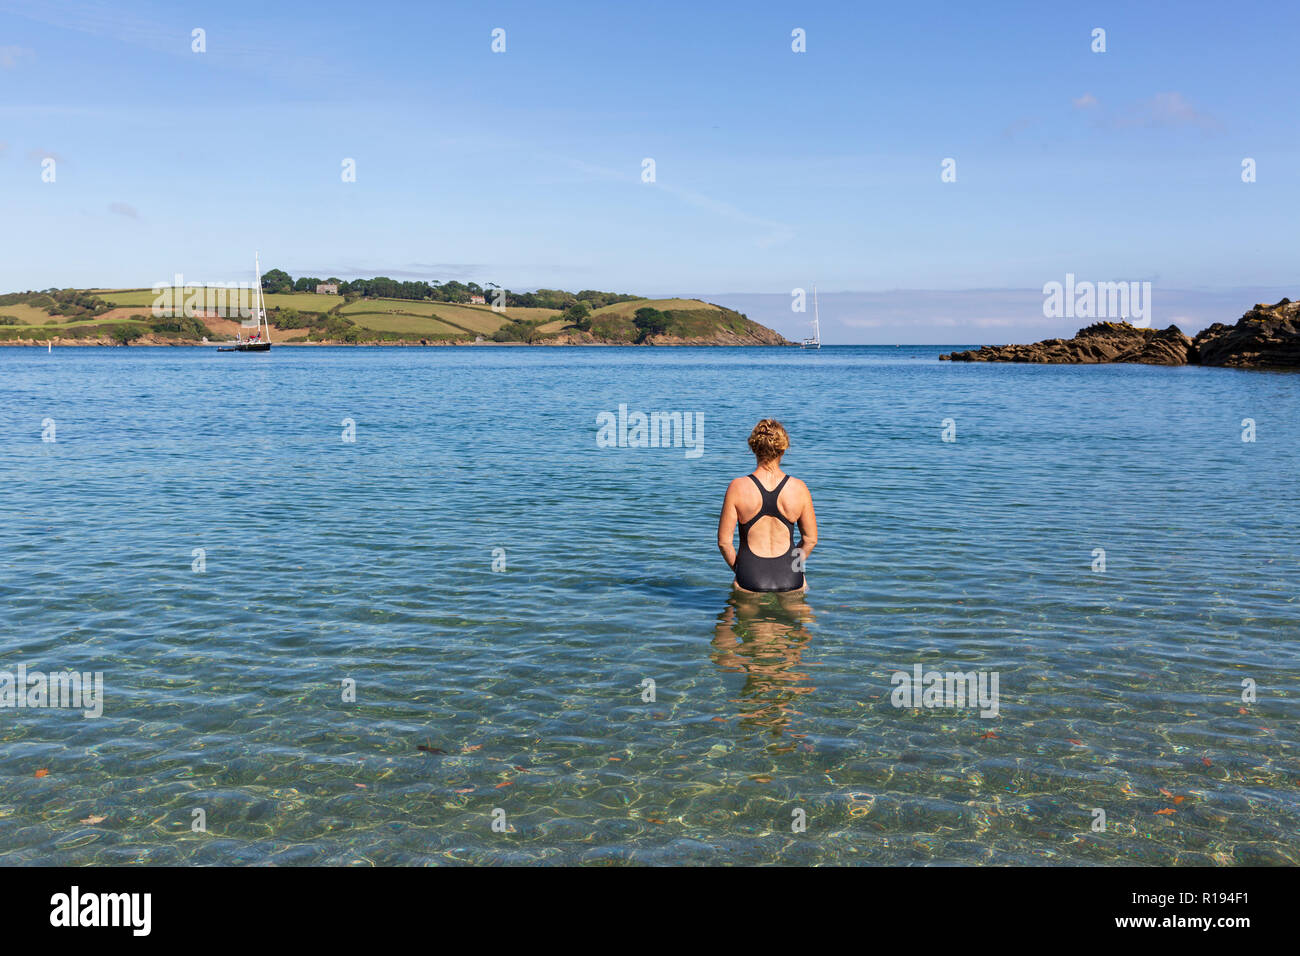 Woman wearing a swimming costume entering the cool, clear water at Bosahan Cove on the the Helford River Estuary in Cornwall, England. Stock Photo